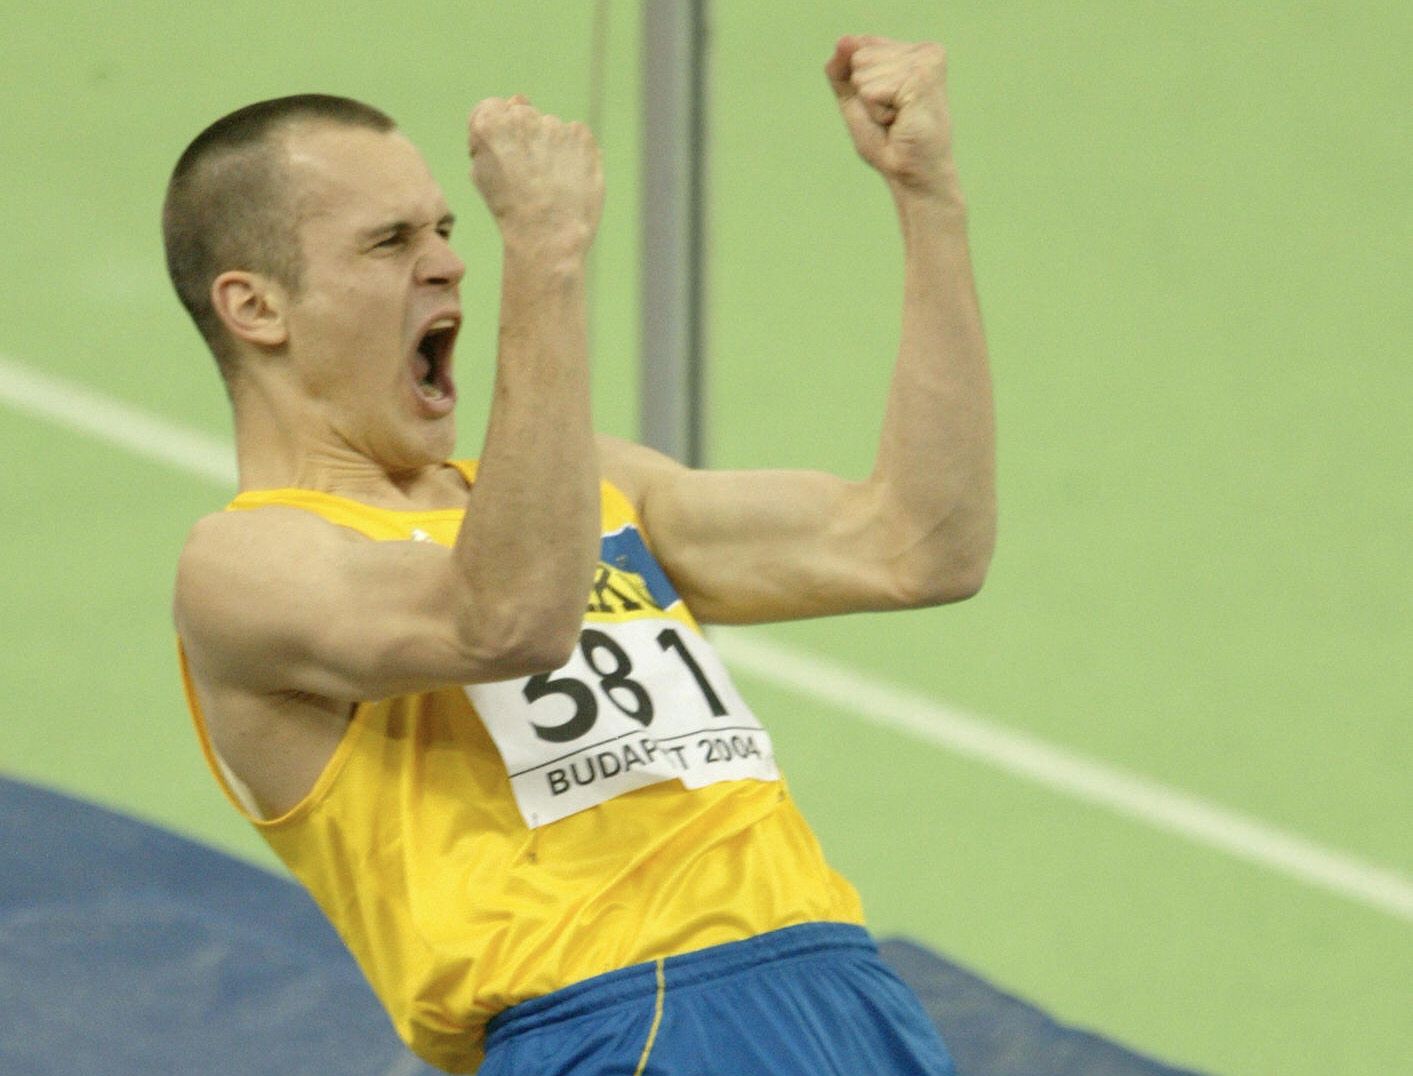 Stefan Holm reacts to his success at the 2004 World Indoor Championships in Budapest